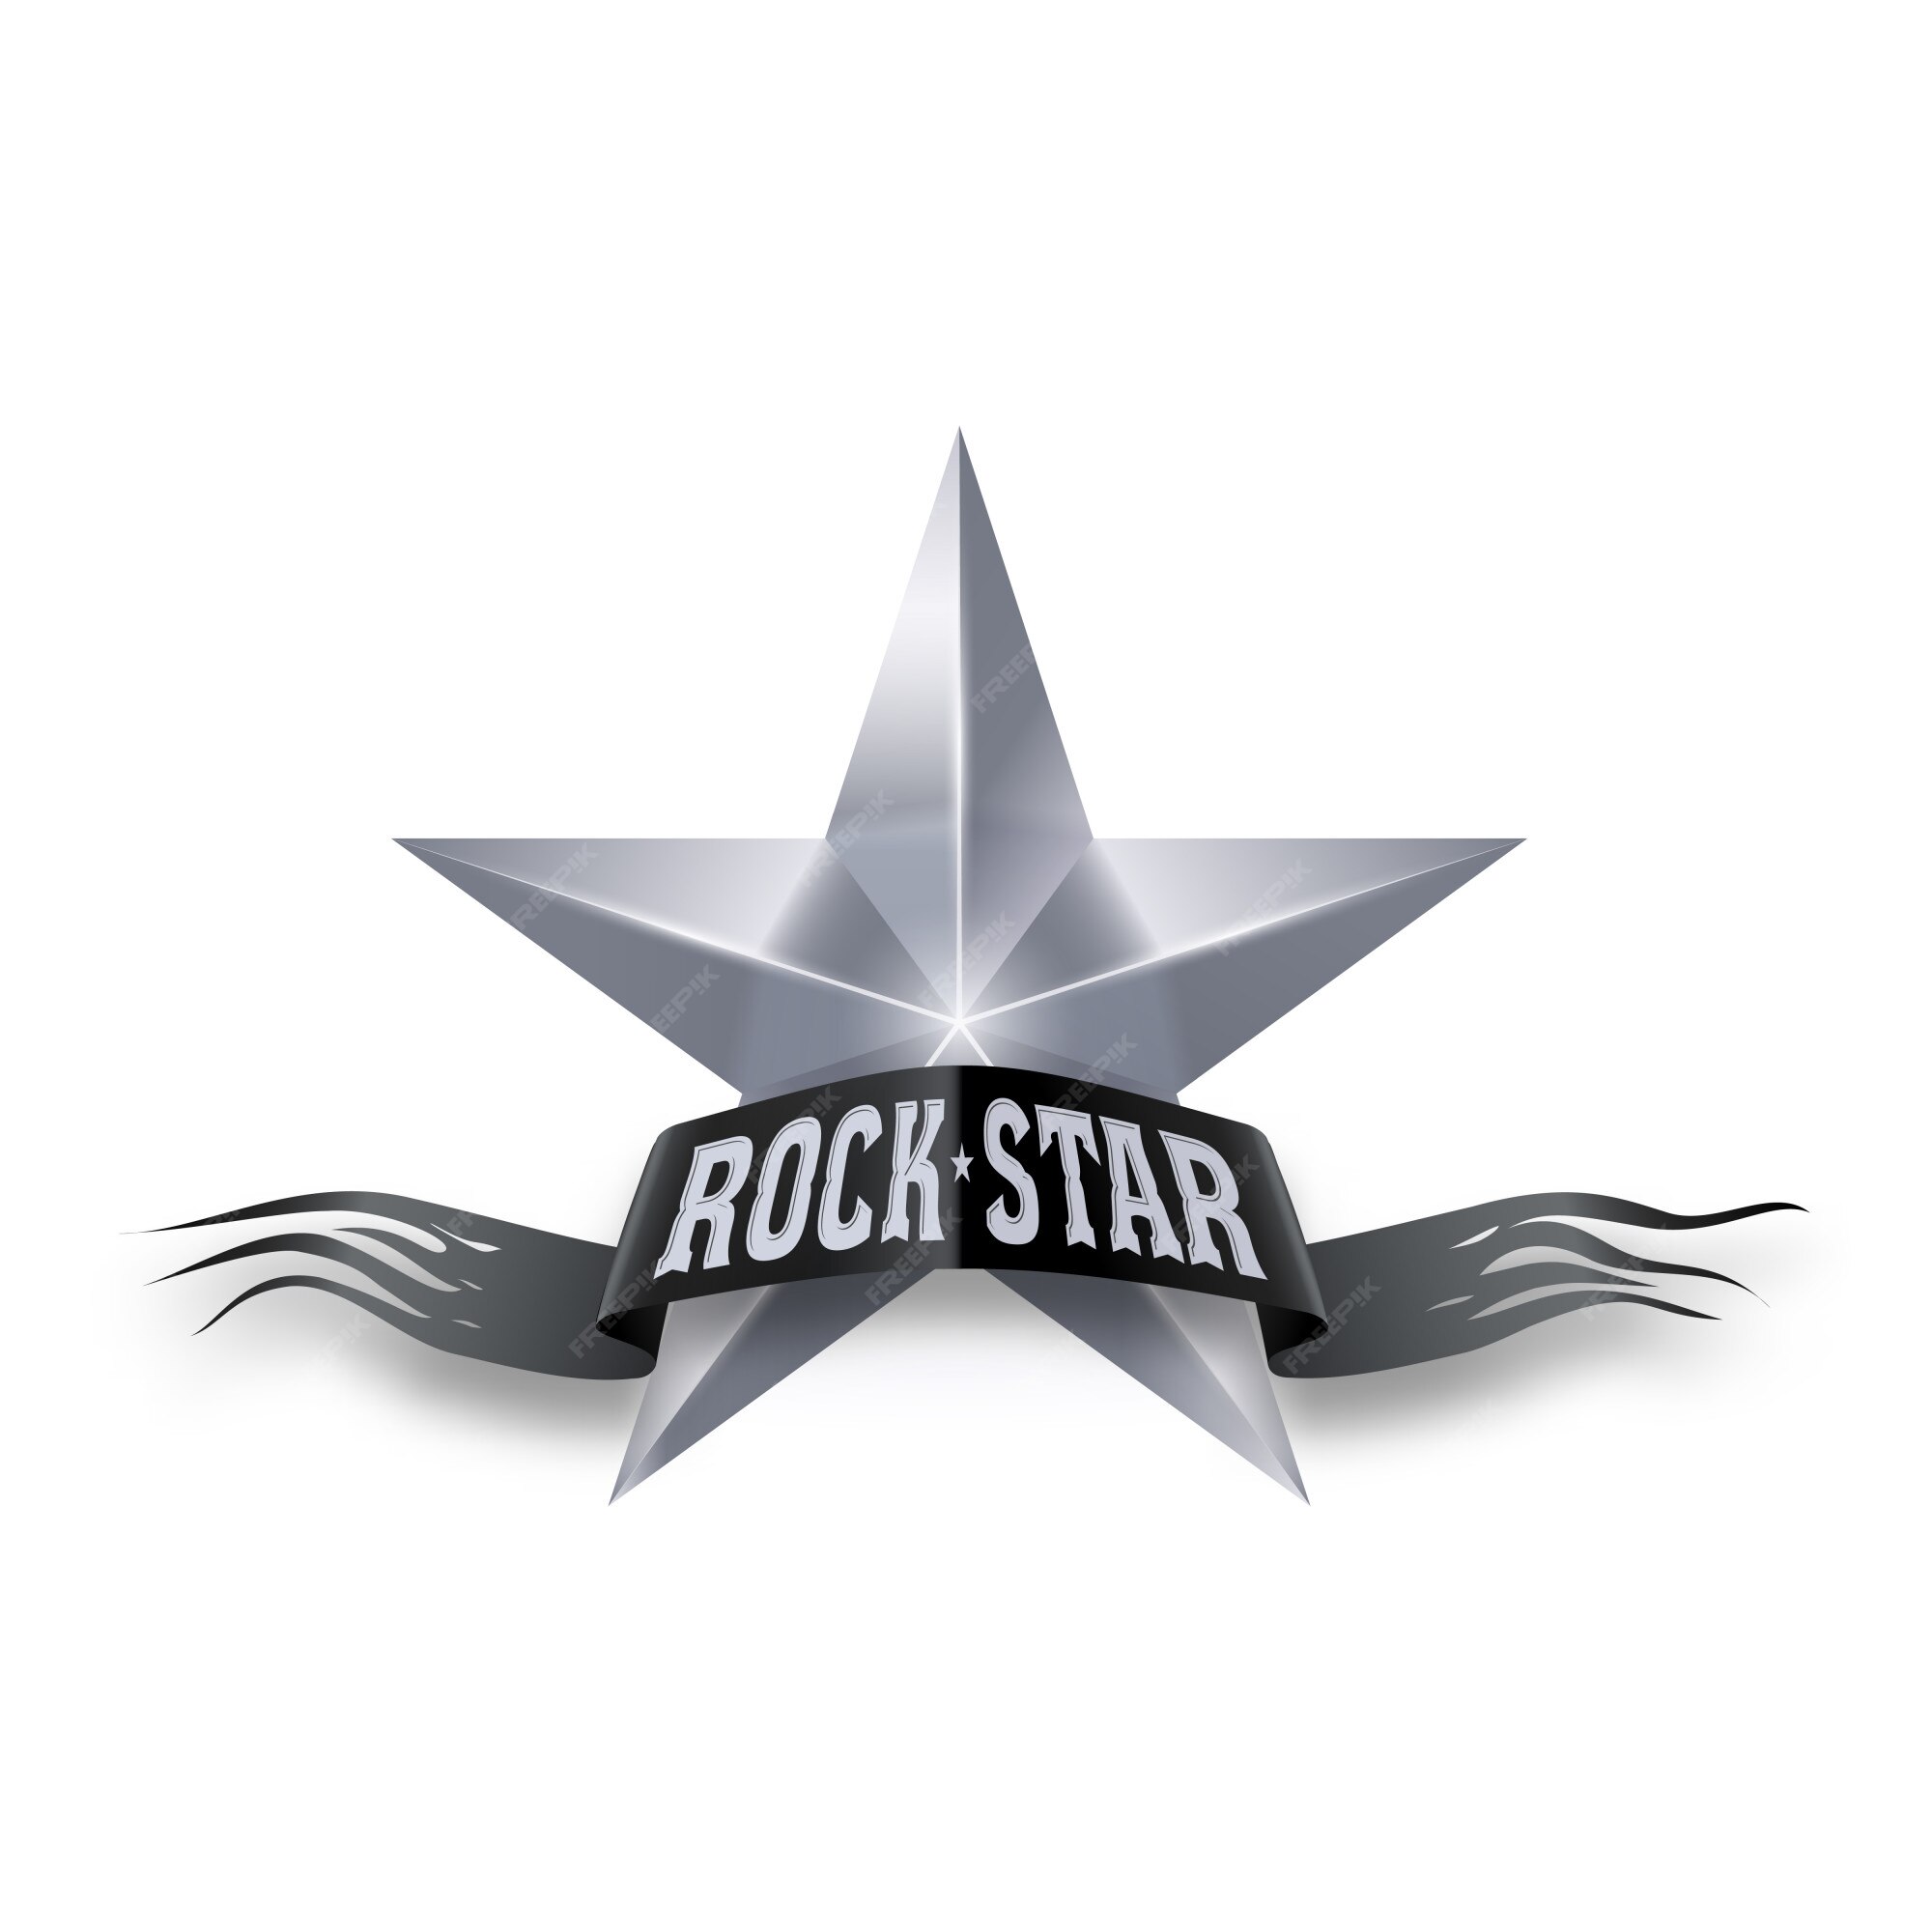 charles runyan recommends sweet rock star estrella pic